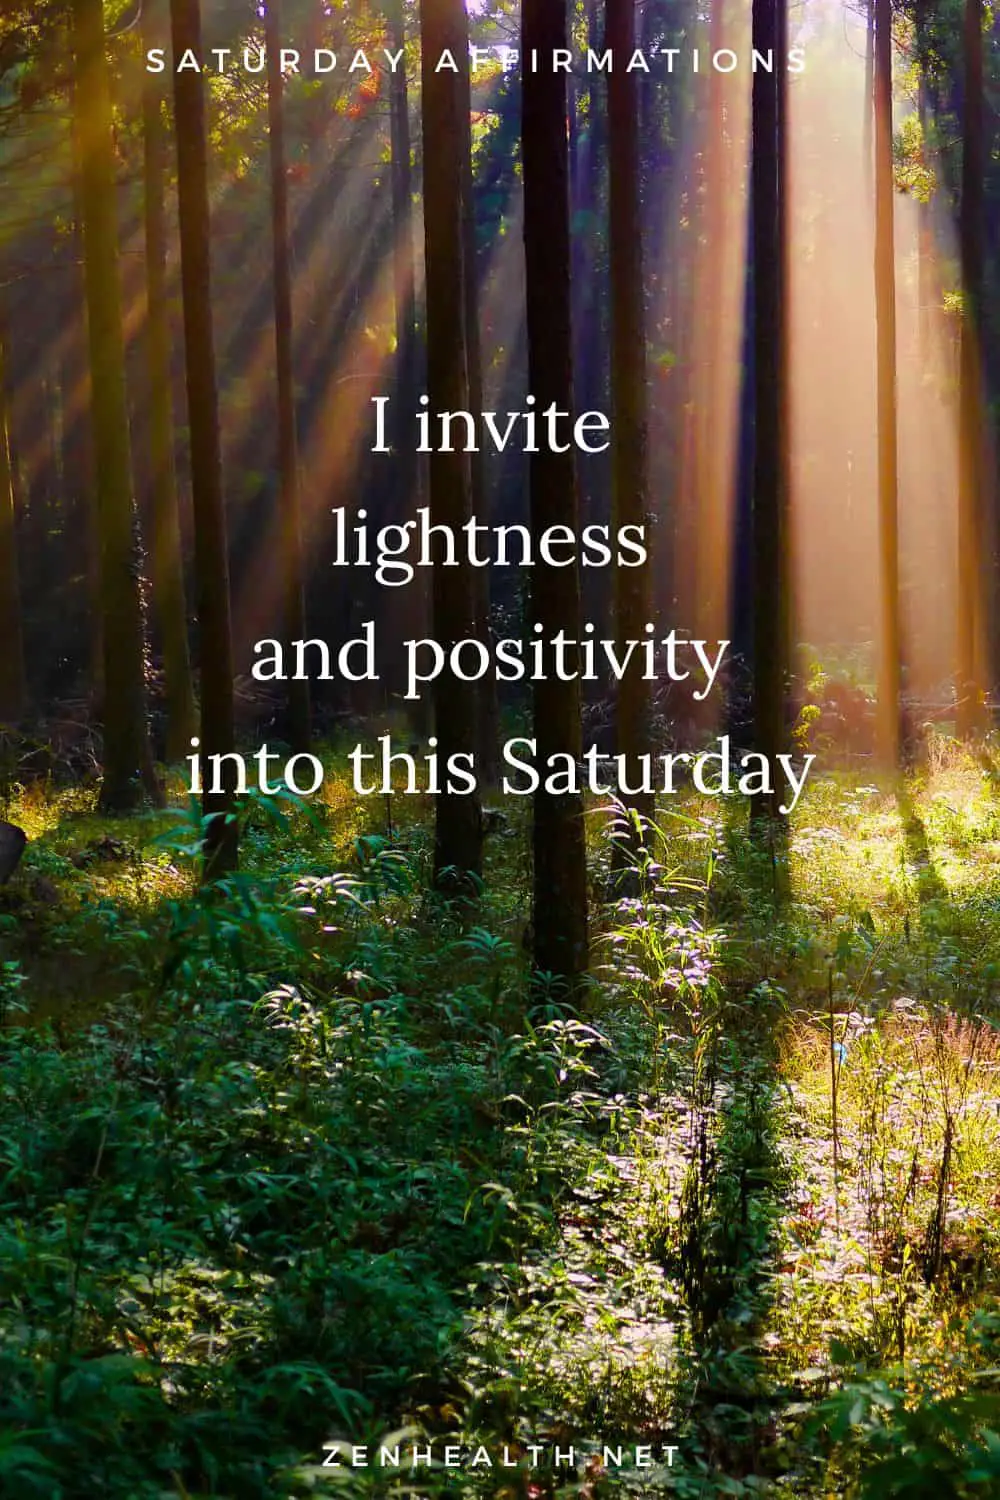 Saturday affirmations: I invite lightness and positivity into this Saturday.